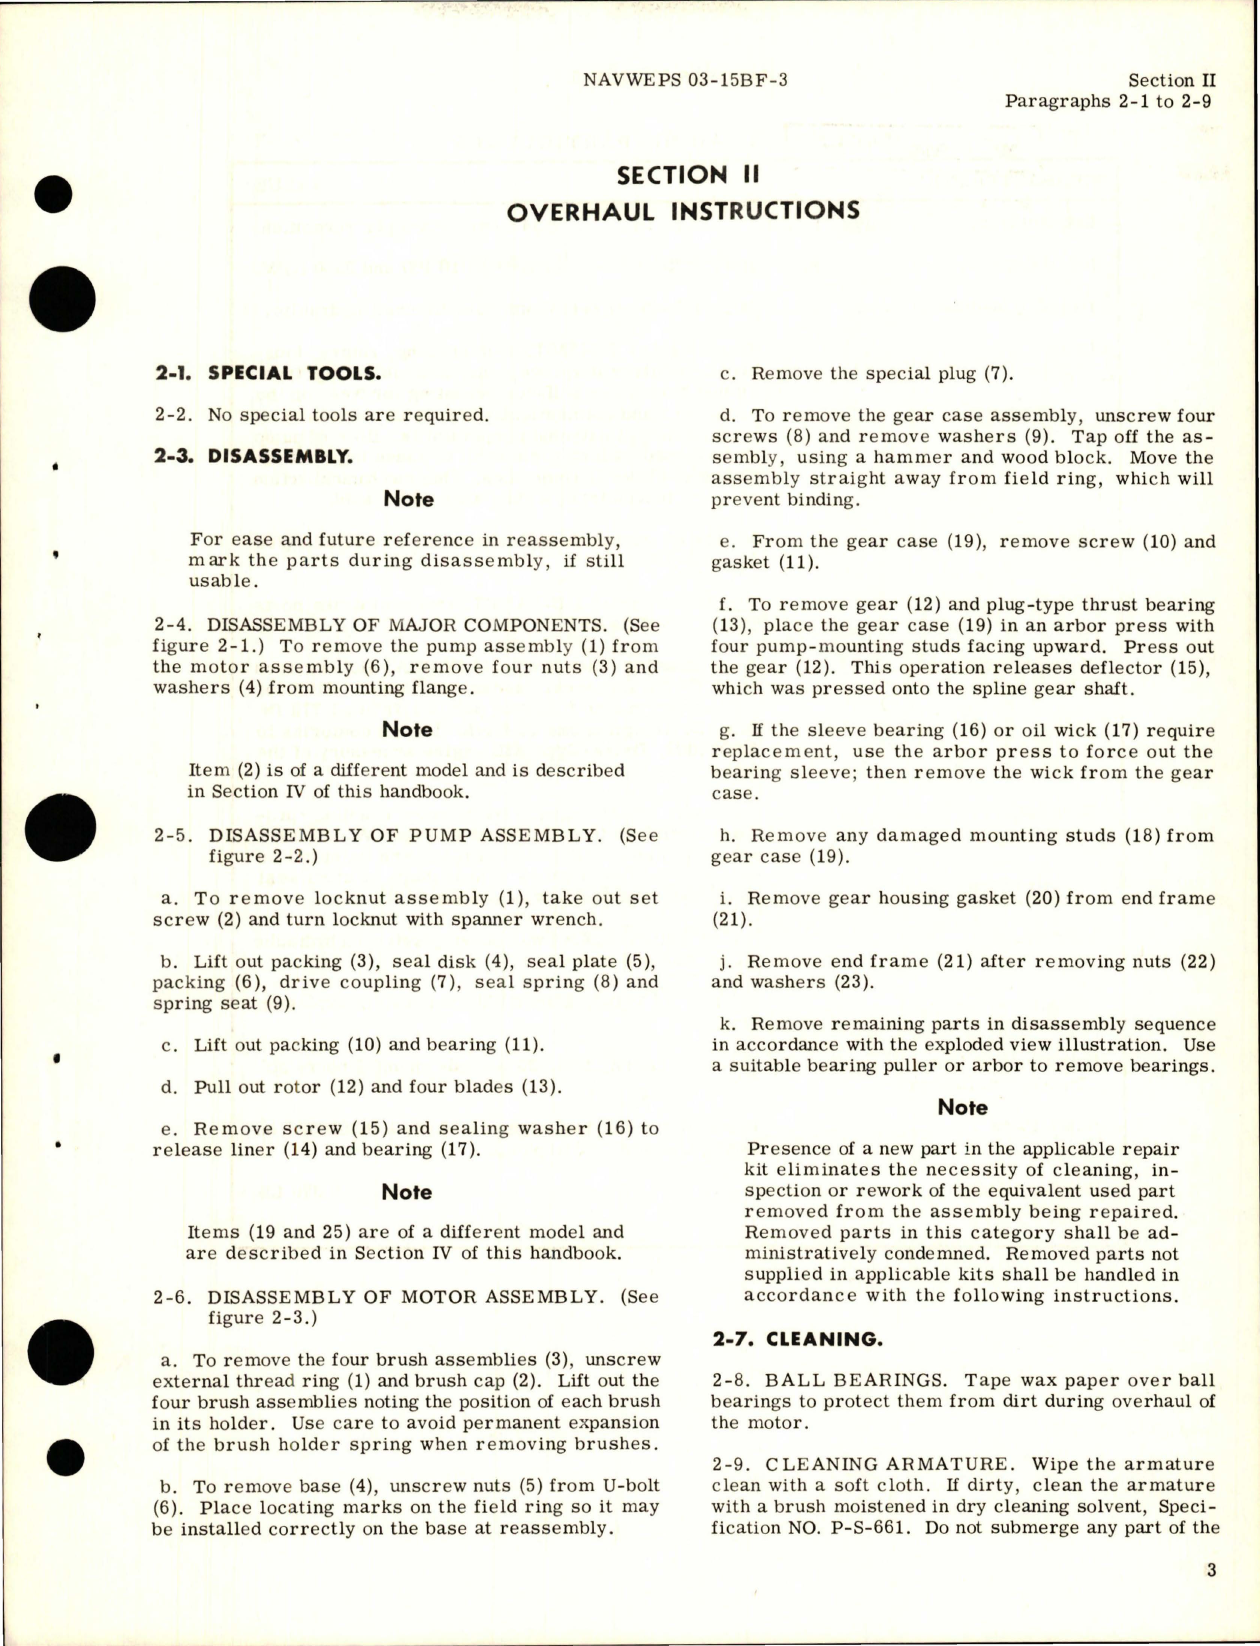 Sample page 7 from AirCorps Library document: Overhaul Instructions for Electric Motor Driven Hydraulic Oil Pump Assembly - Parts RG6100E1 and RG6100H